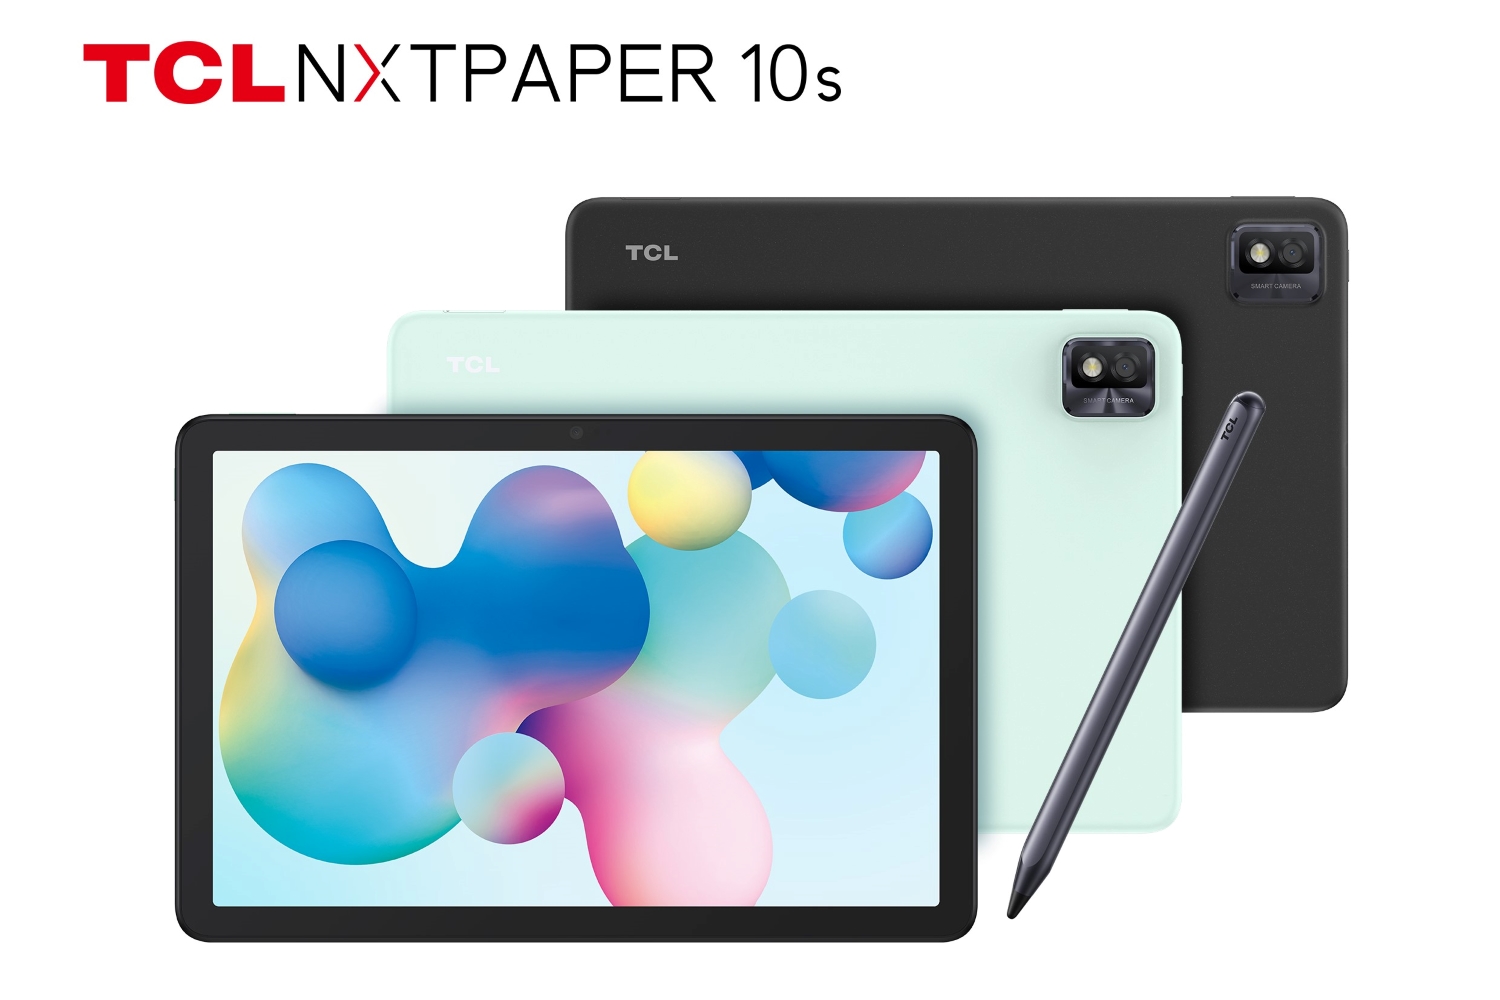 ReMarkable vs TCL NxtPaper 11: What is the difference?